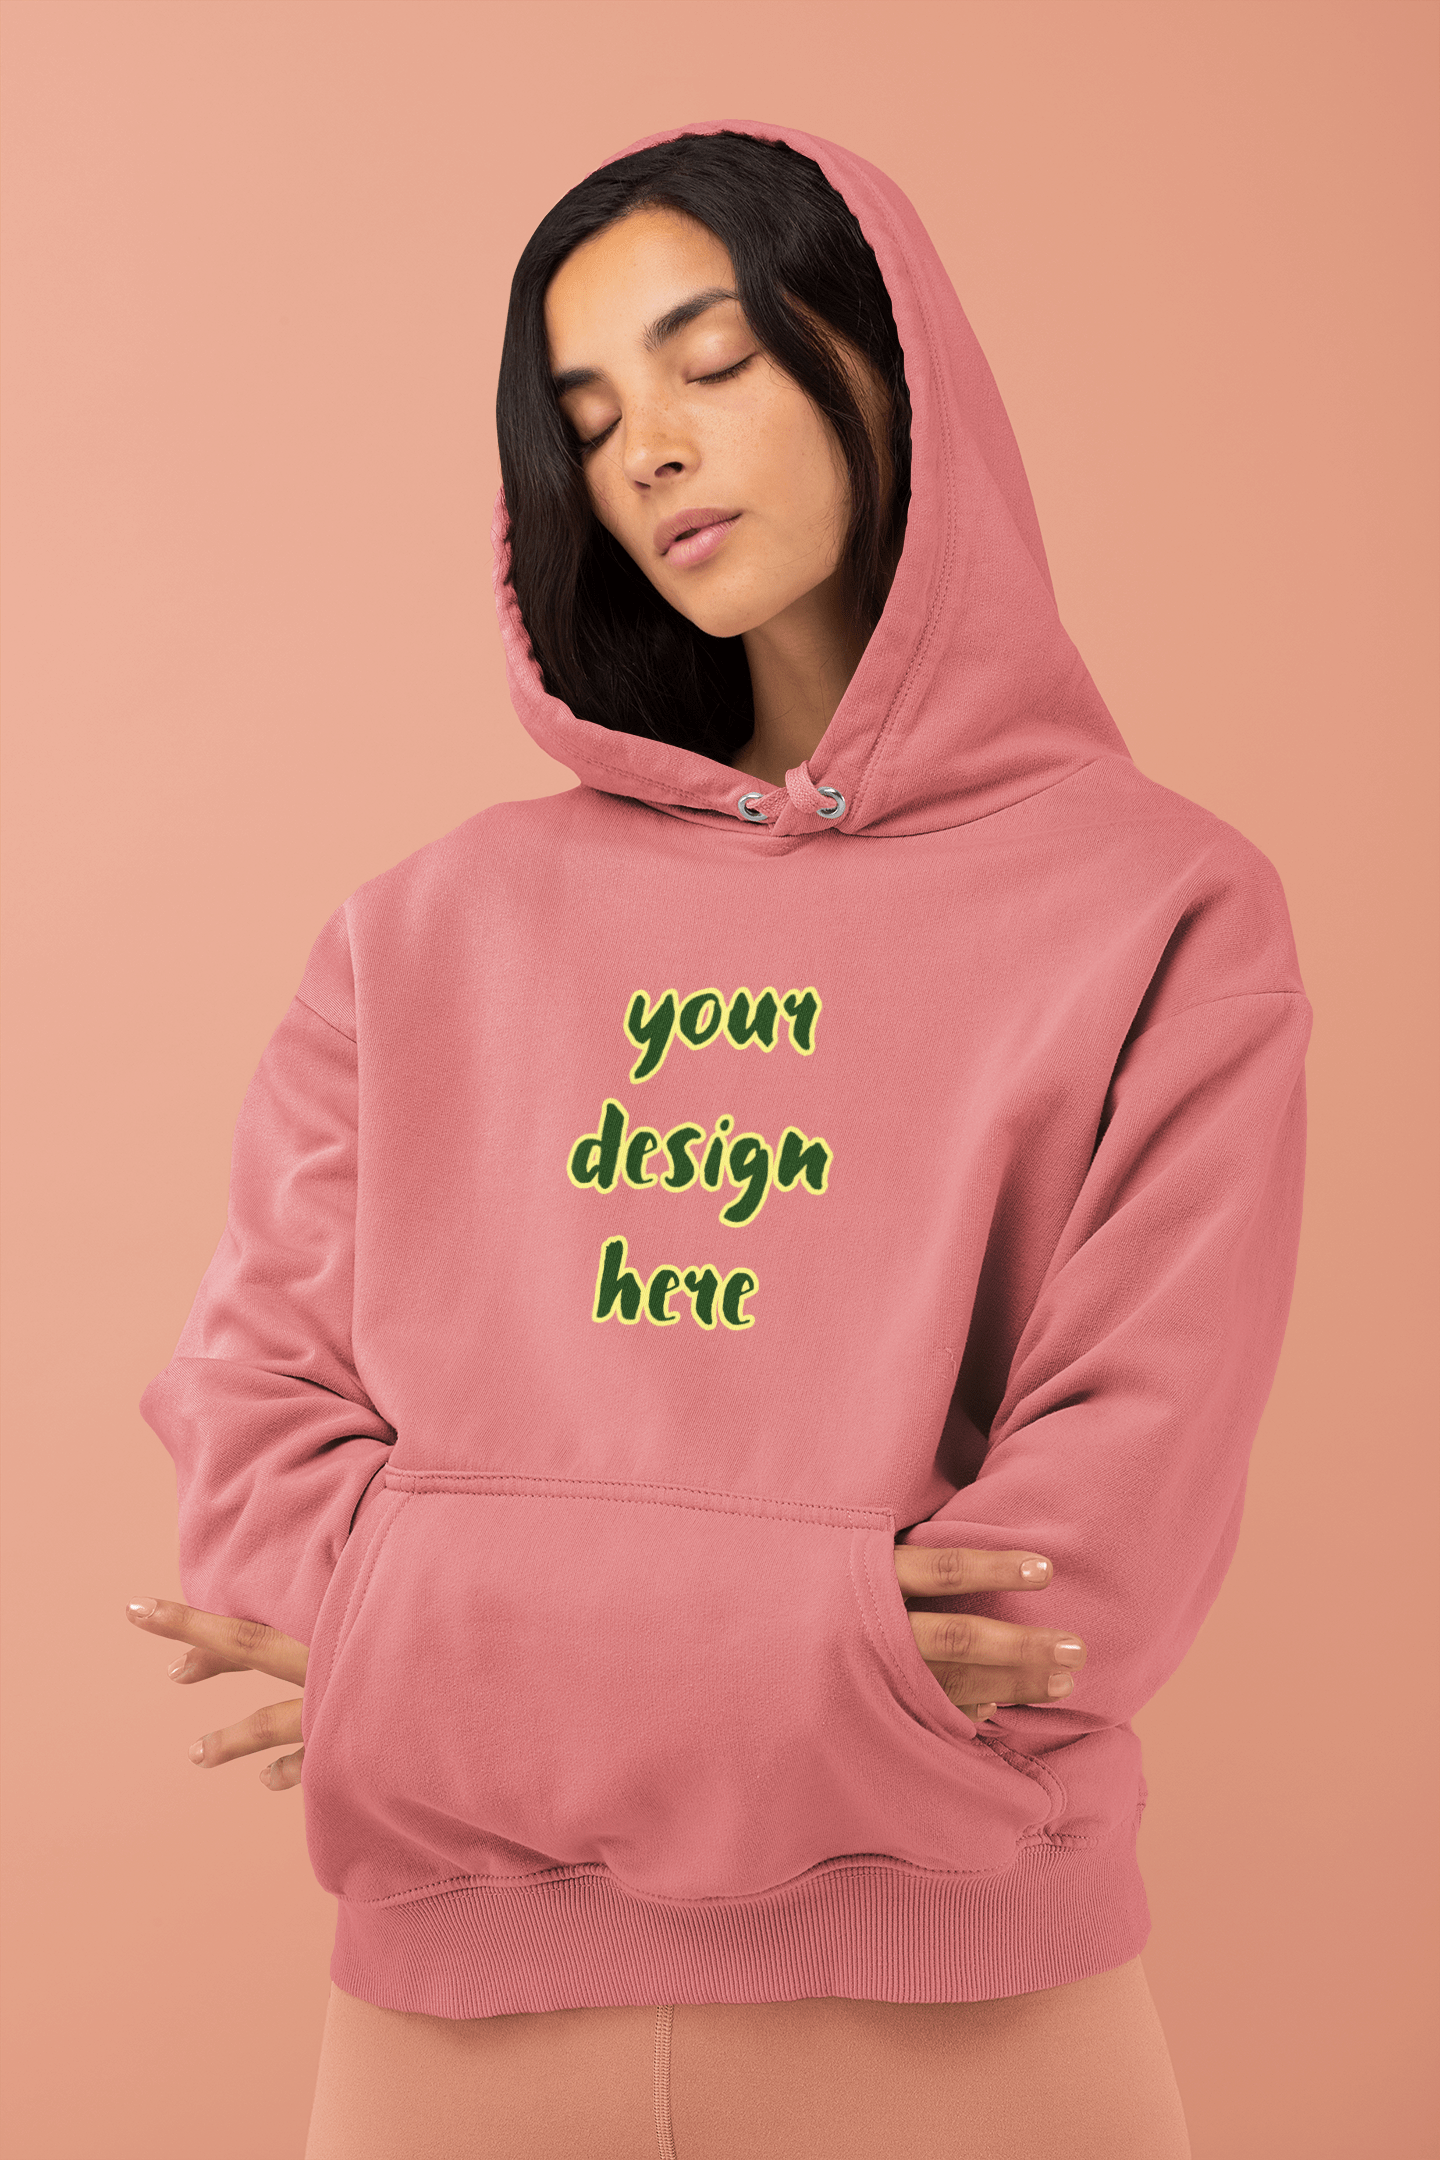 JPG Download Fashion Styled Stock Photography Wood Background Blank Women's Black Hoodie Shirt Apparel Mockup Girl's Mock Up Sweater